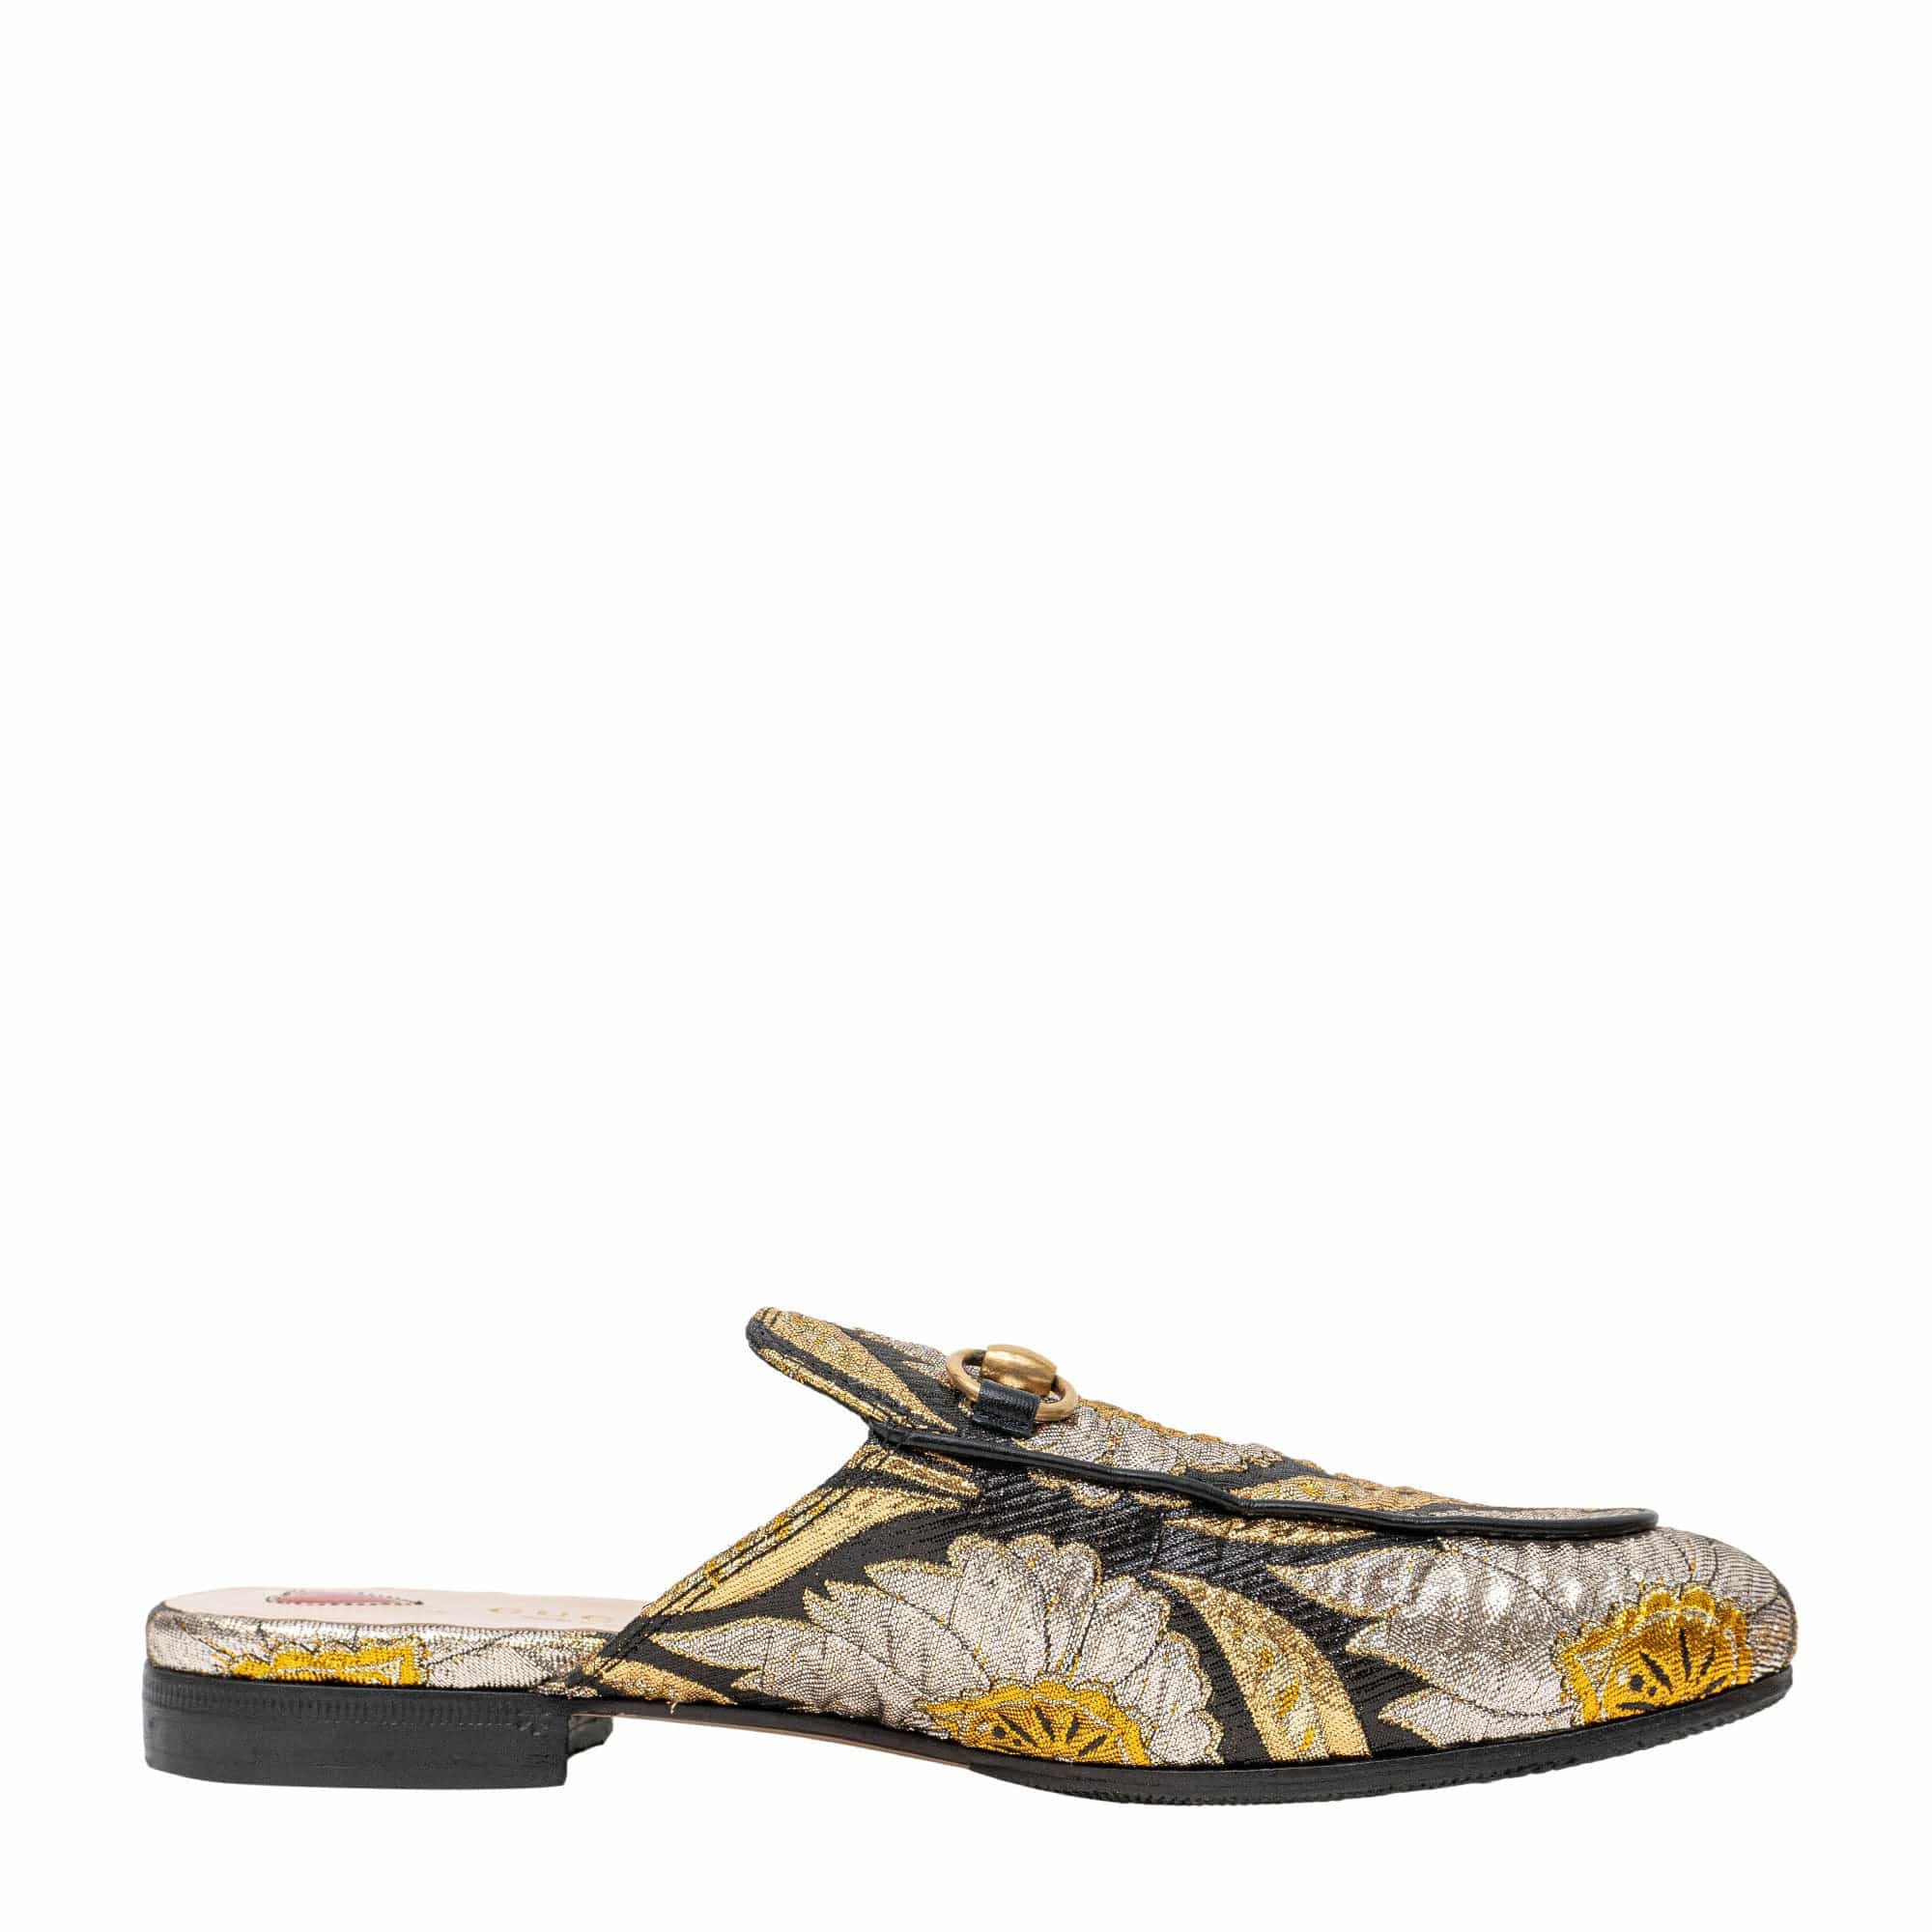 Gucci Jacquard Princetown Mules 36.5 SYCH081